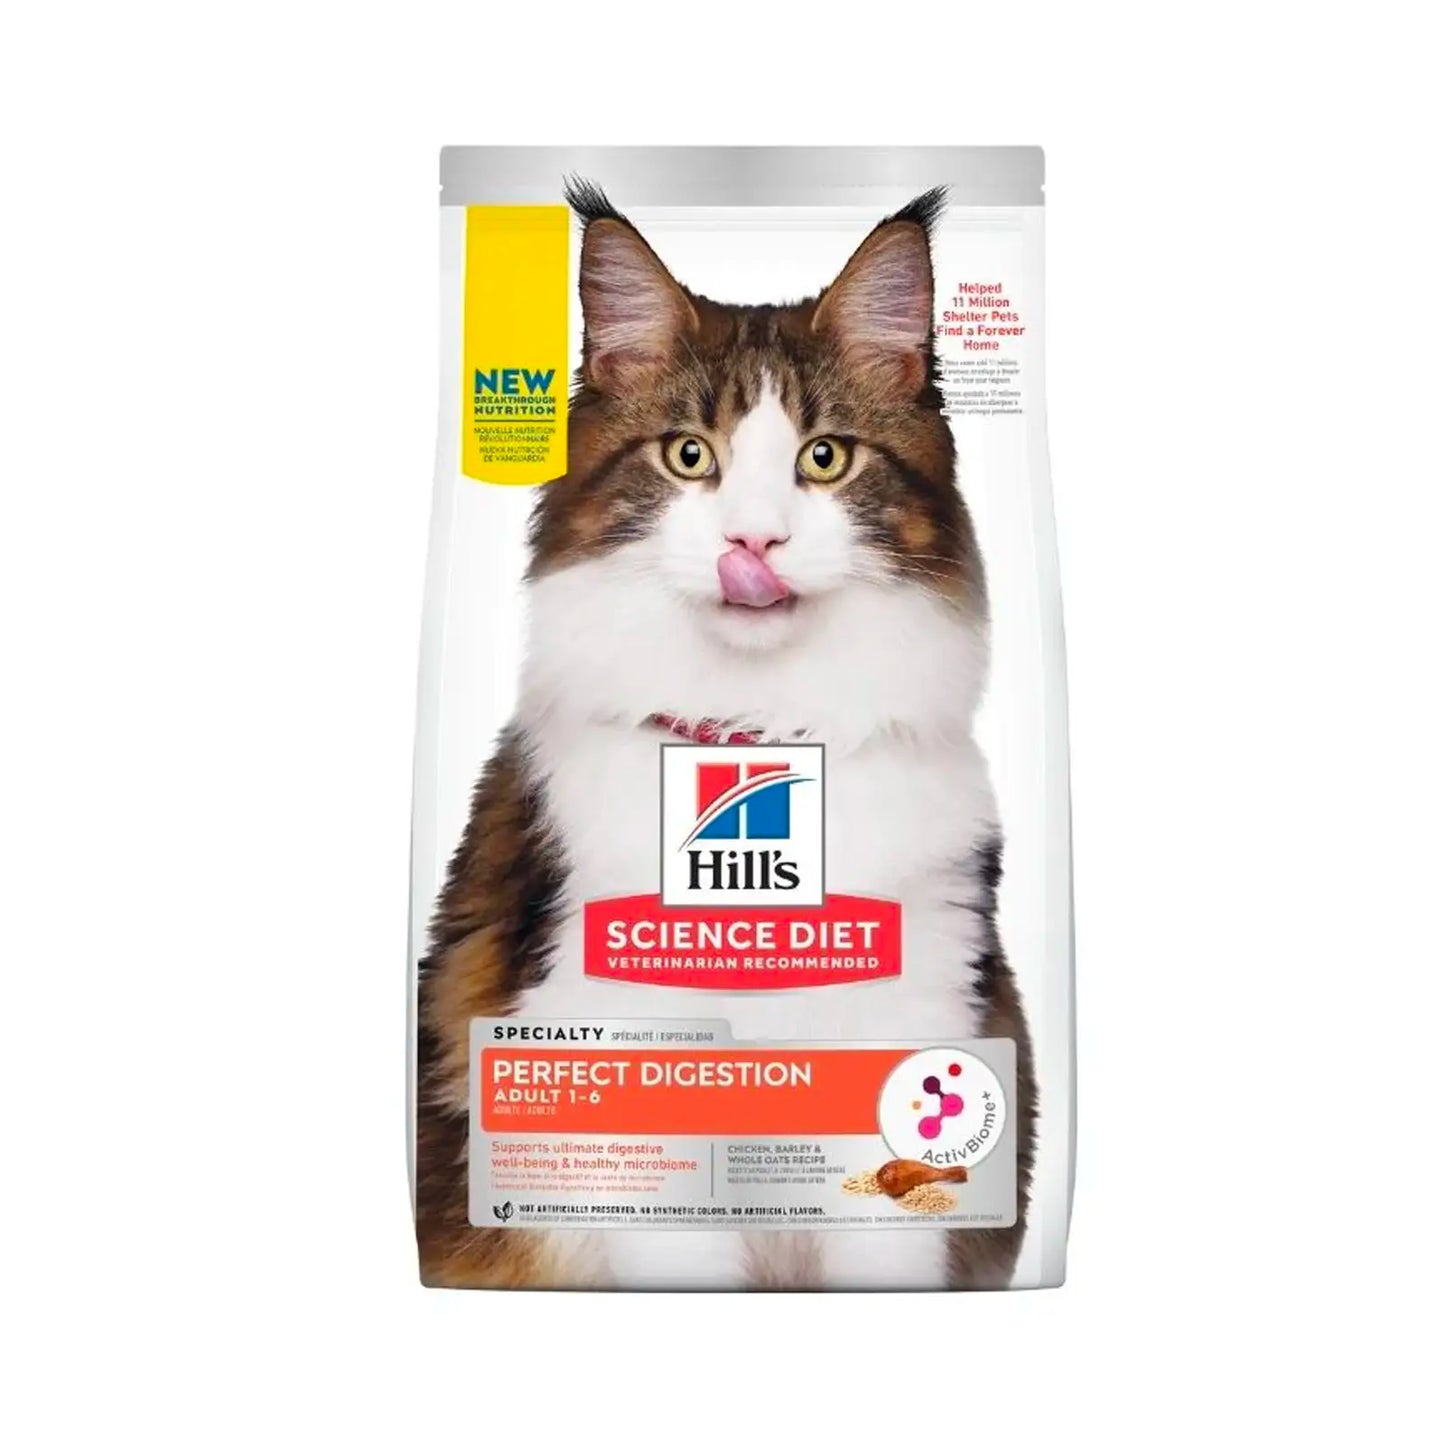 Hill's Science Diet (Specialty) - Perfect Digestion Feline Adult 1+ Chicken, Barley & Whole Oats 3.5lbs